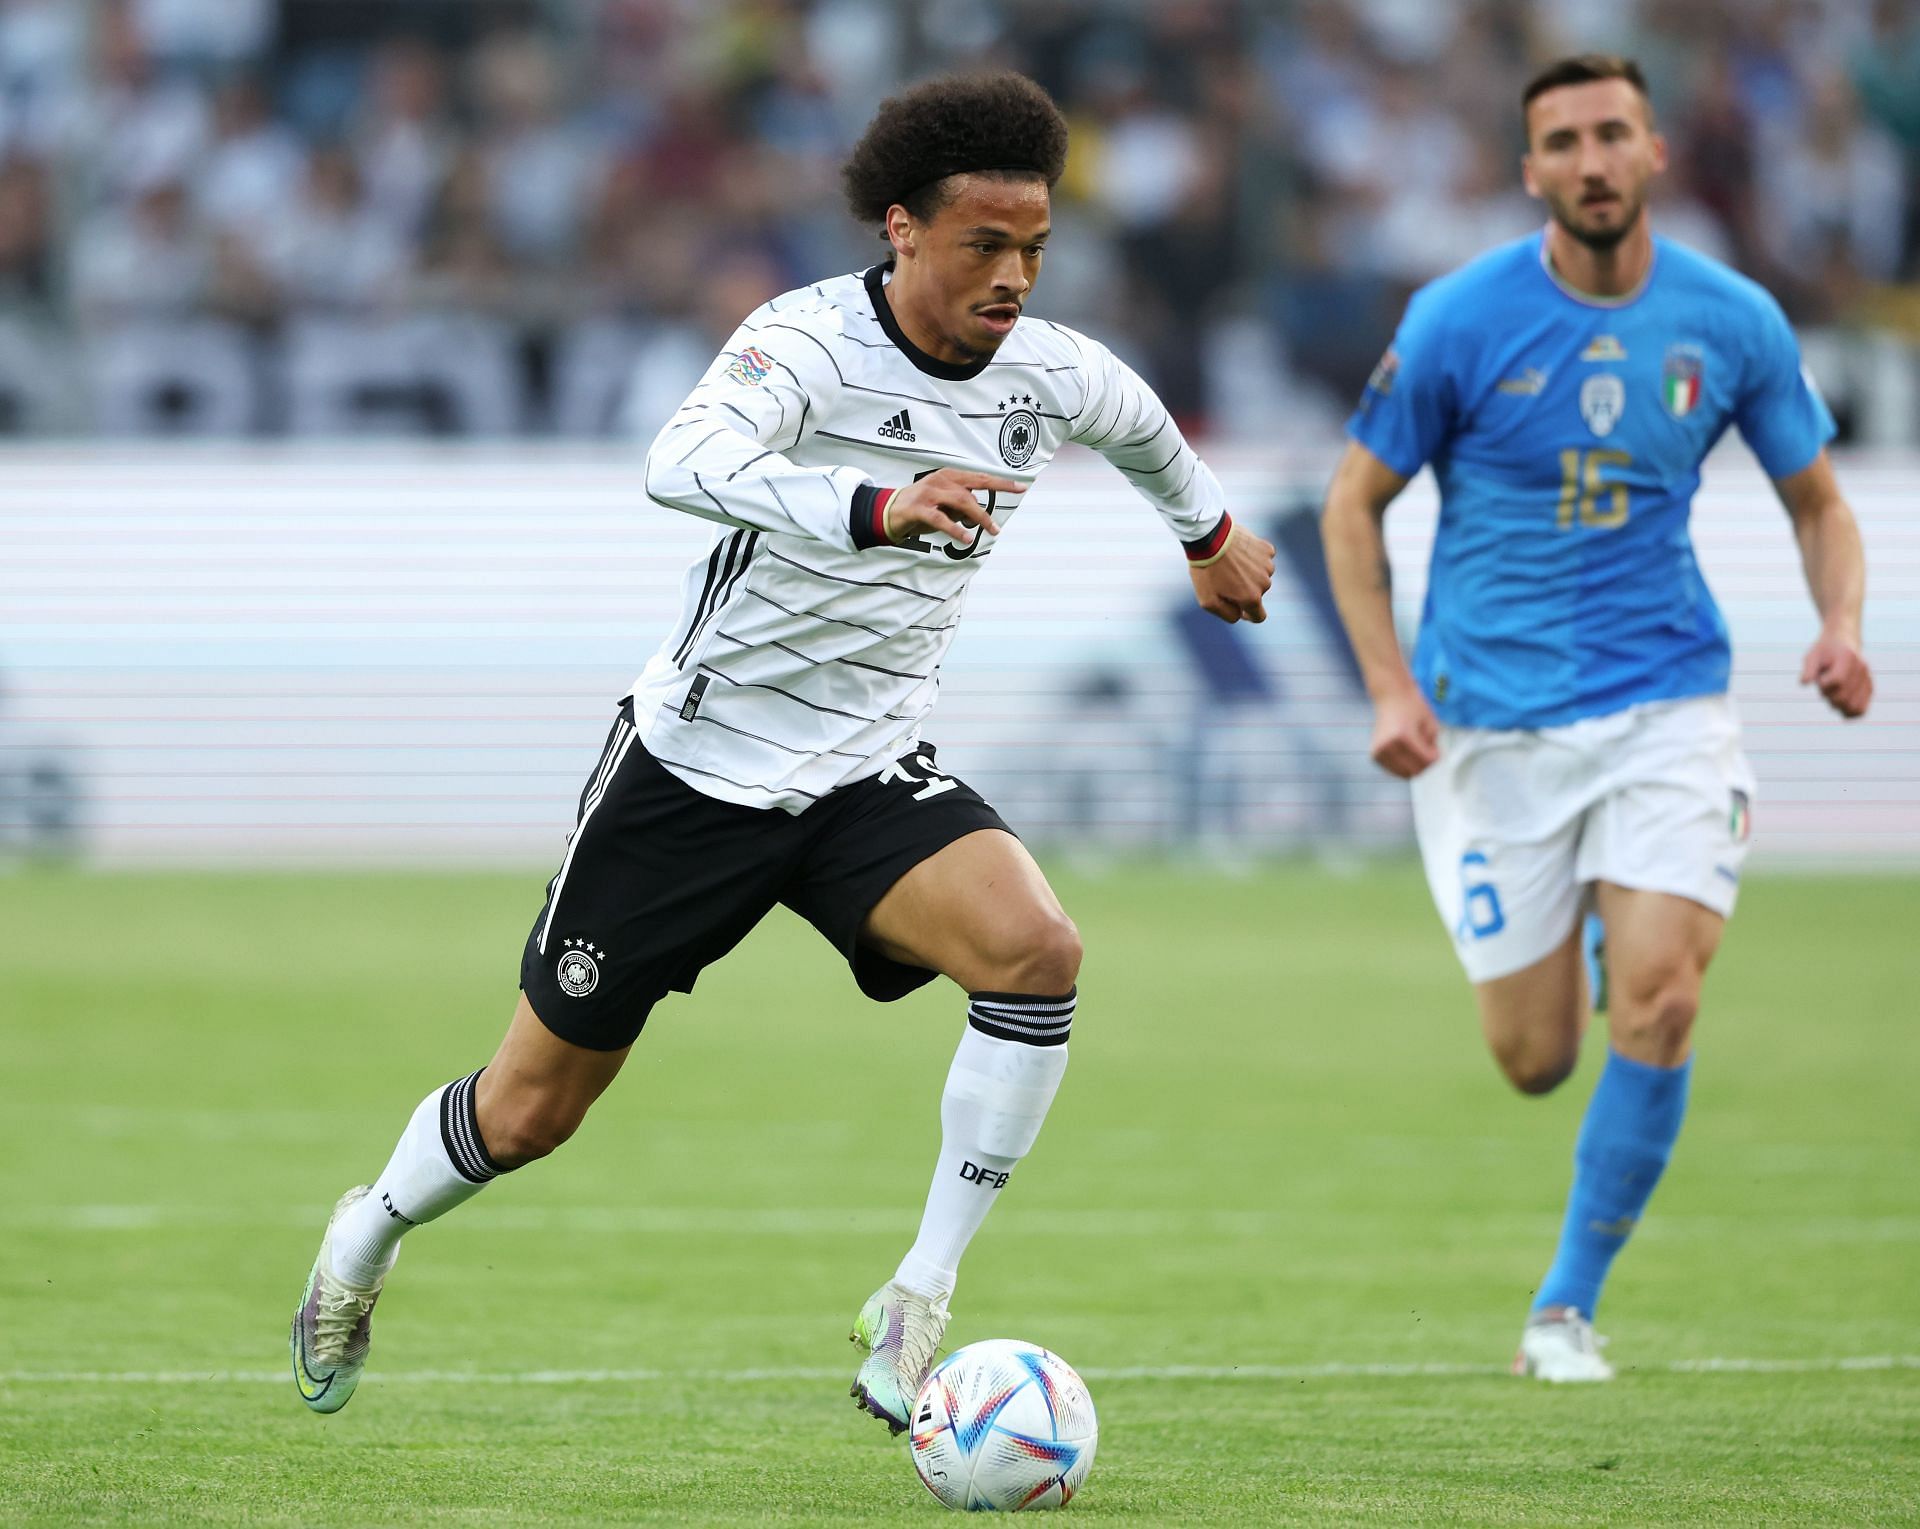 Leroy Sane ran the show for Germany against Italy